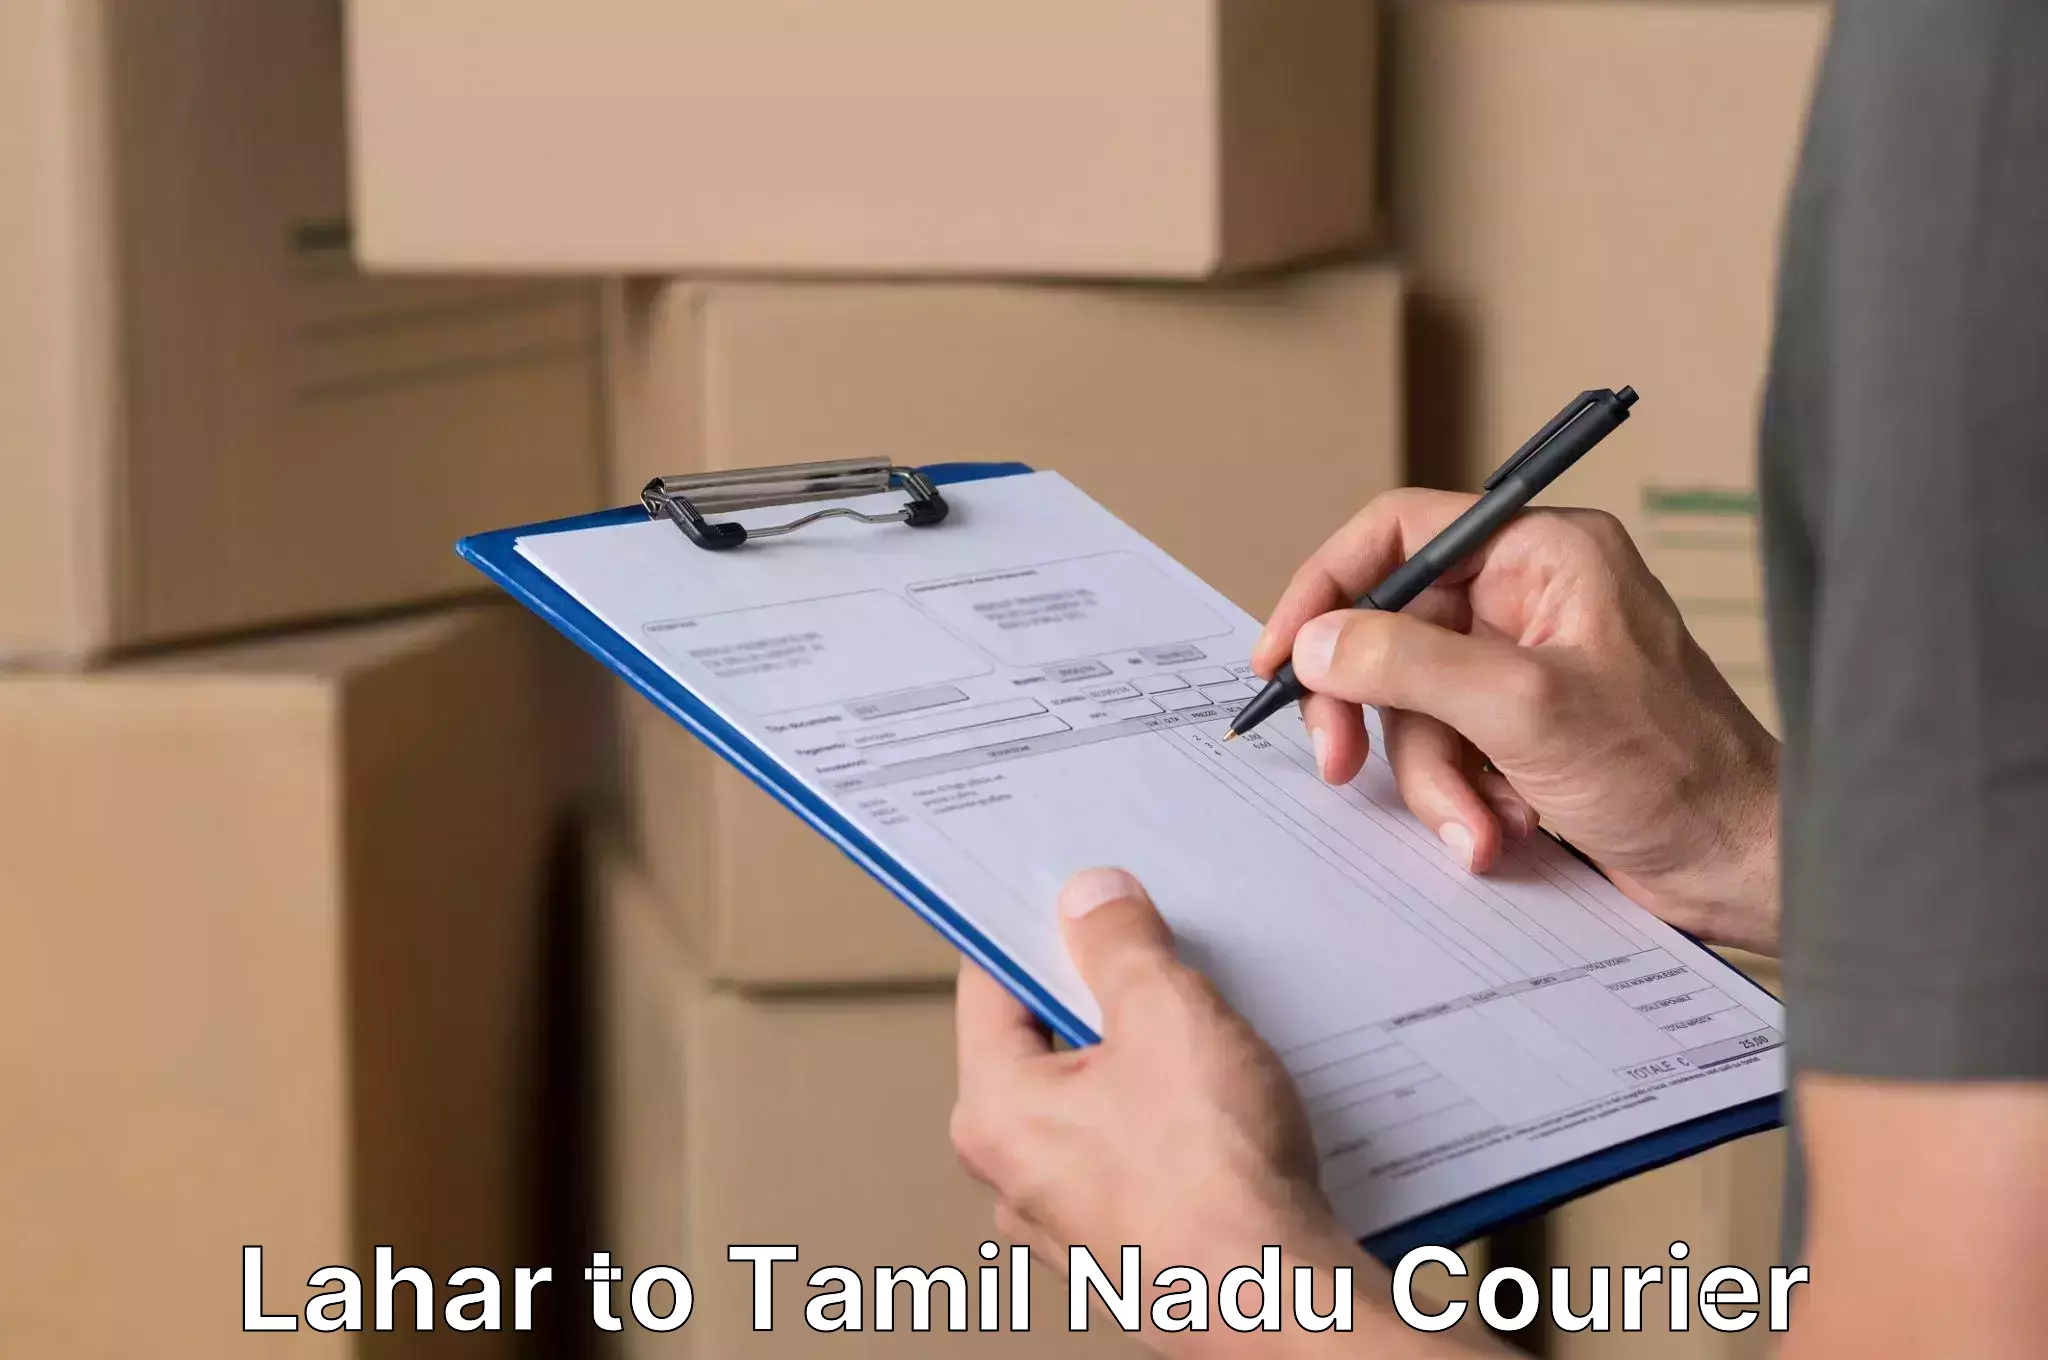 Affordable home movers Lahar to Manamadurai